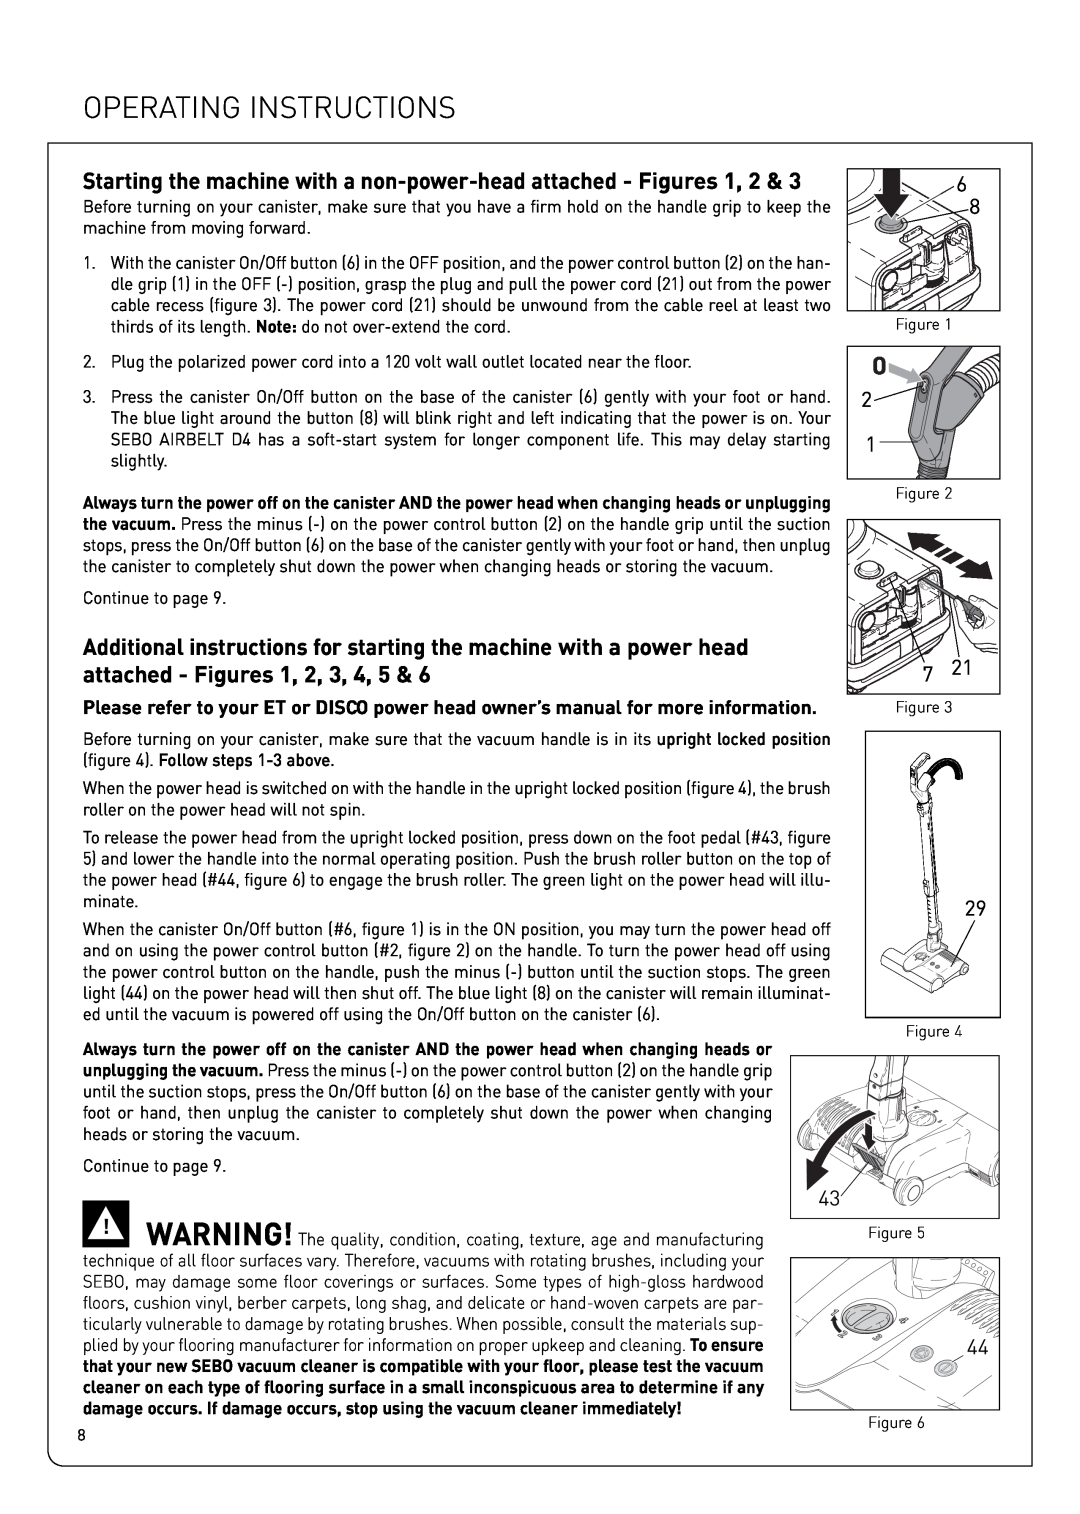 Sebo Airbelt D owner manual attached - Figures, Operating Instructions 